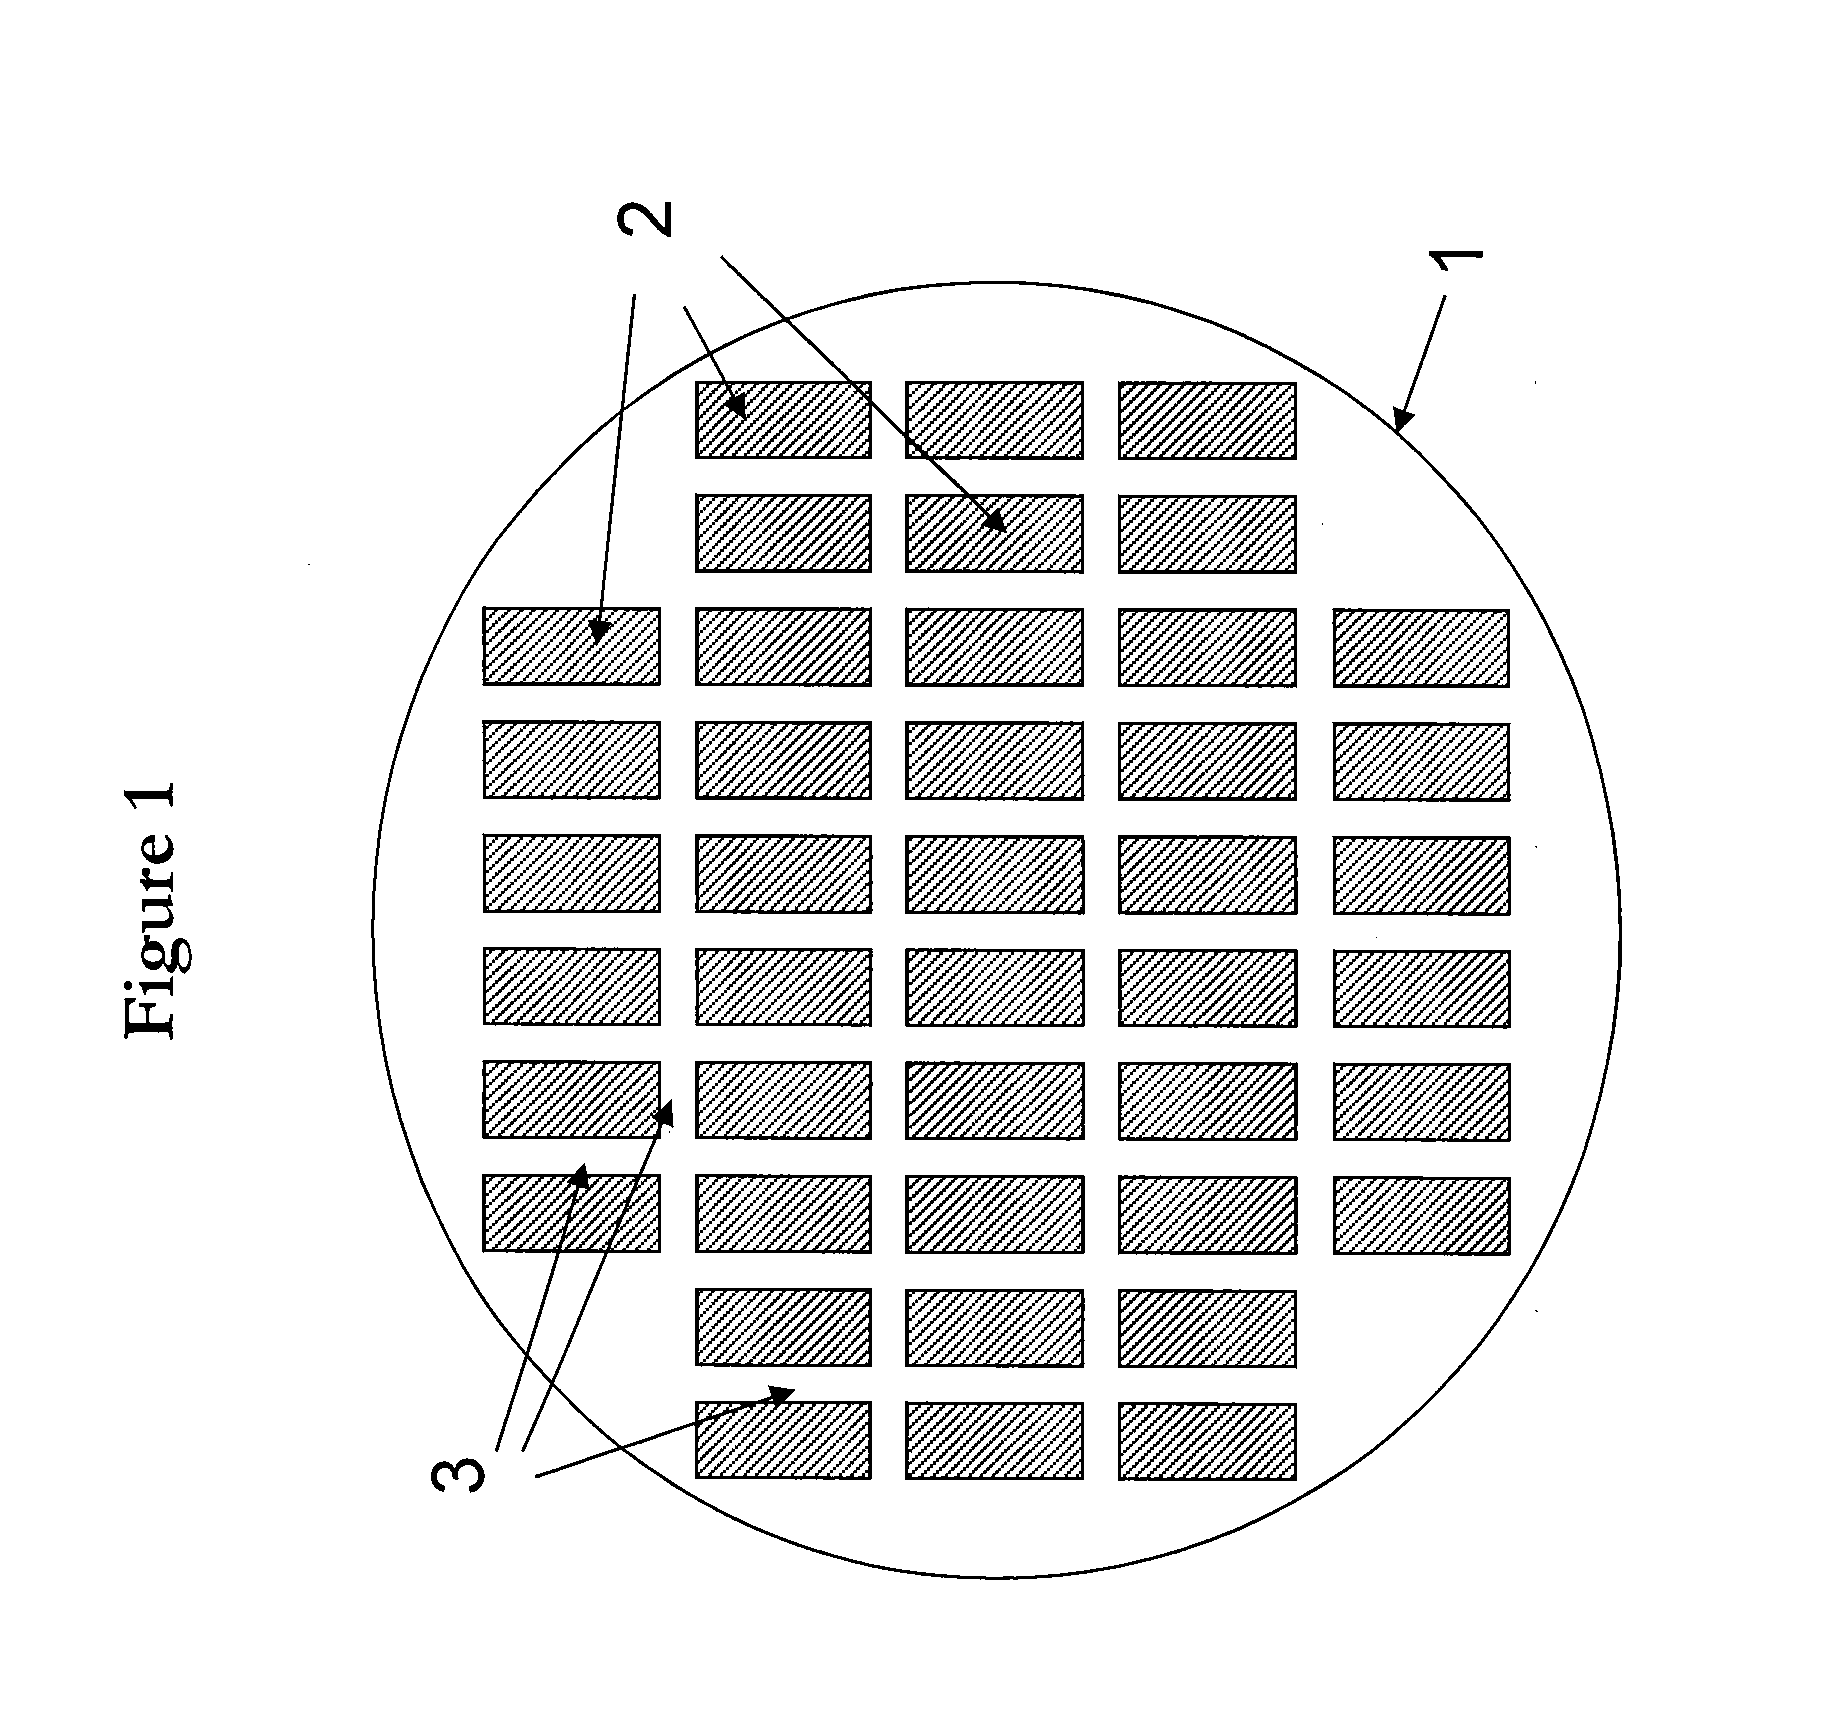 Method and Apparatus for Plasma Dicing a Semi-conductor Wafer